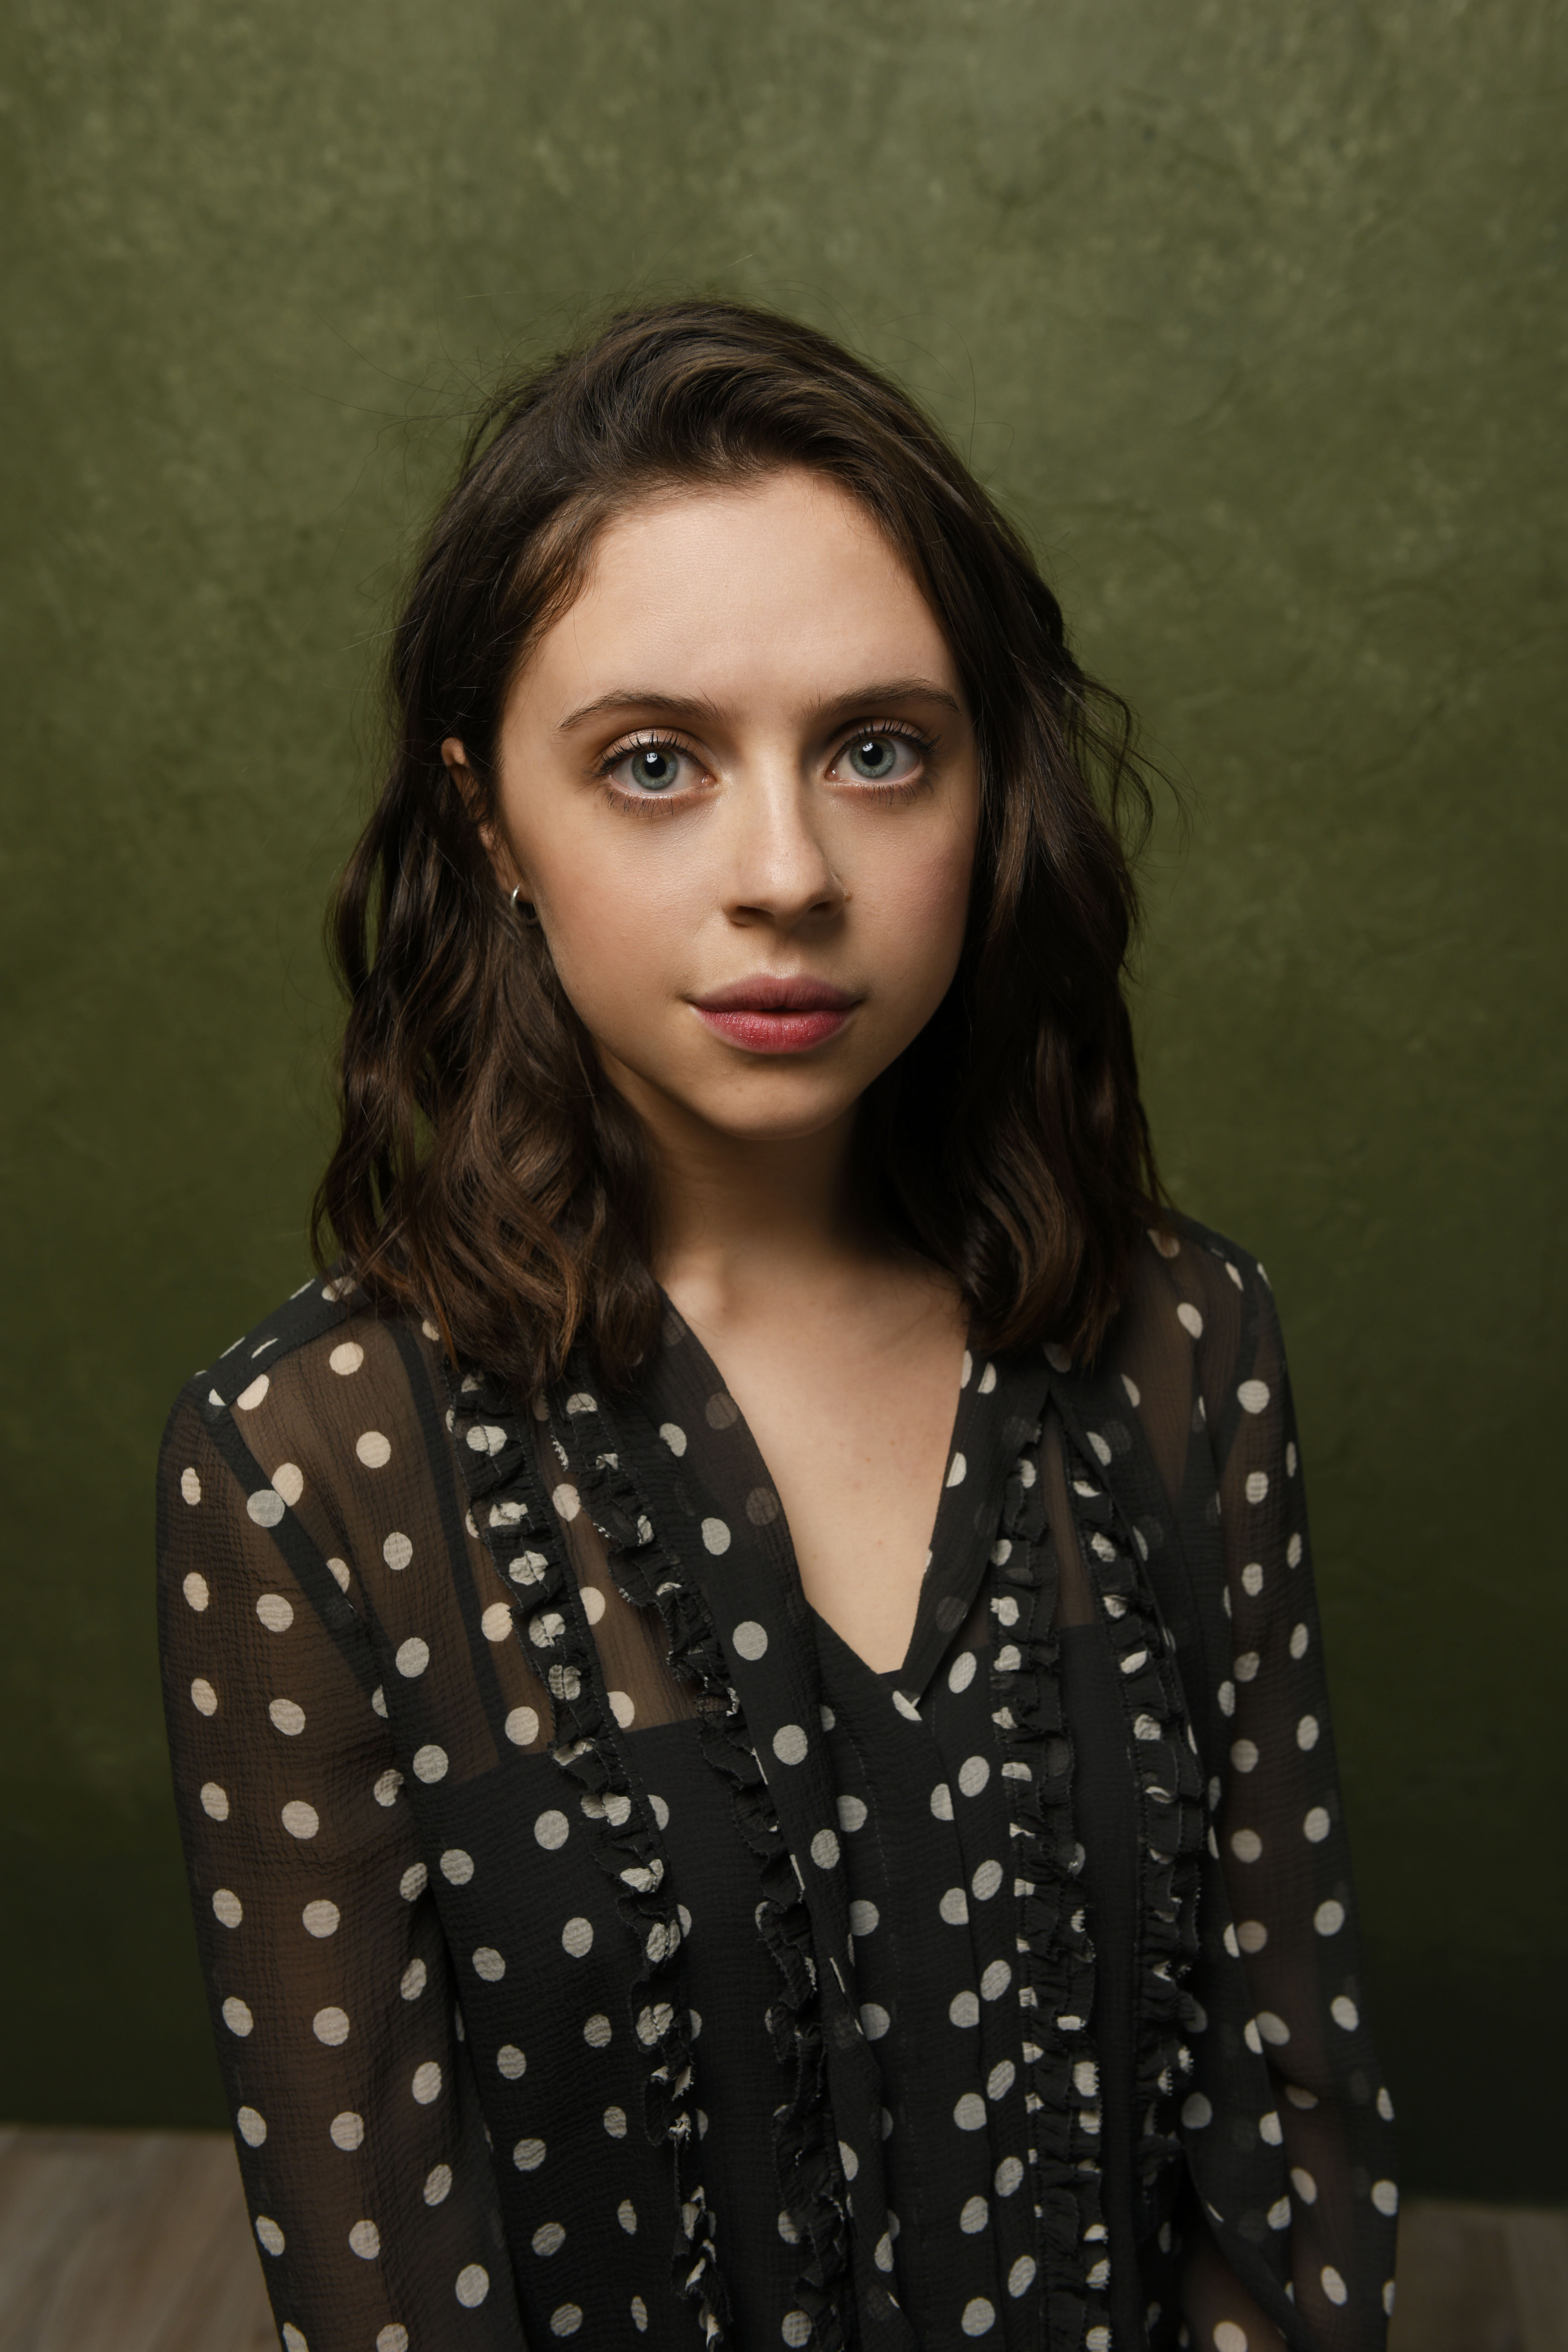 Bel Powley poses for a portrait during the Sundance Film Festival on January 23, 2015 in Park City, Utah.